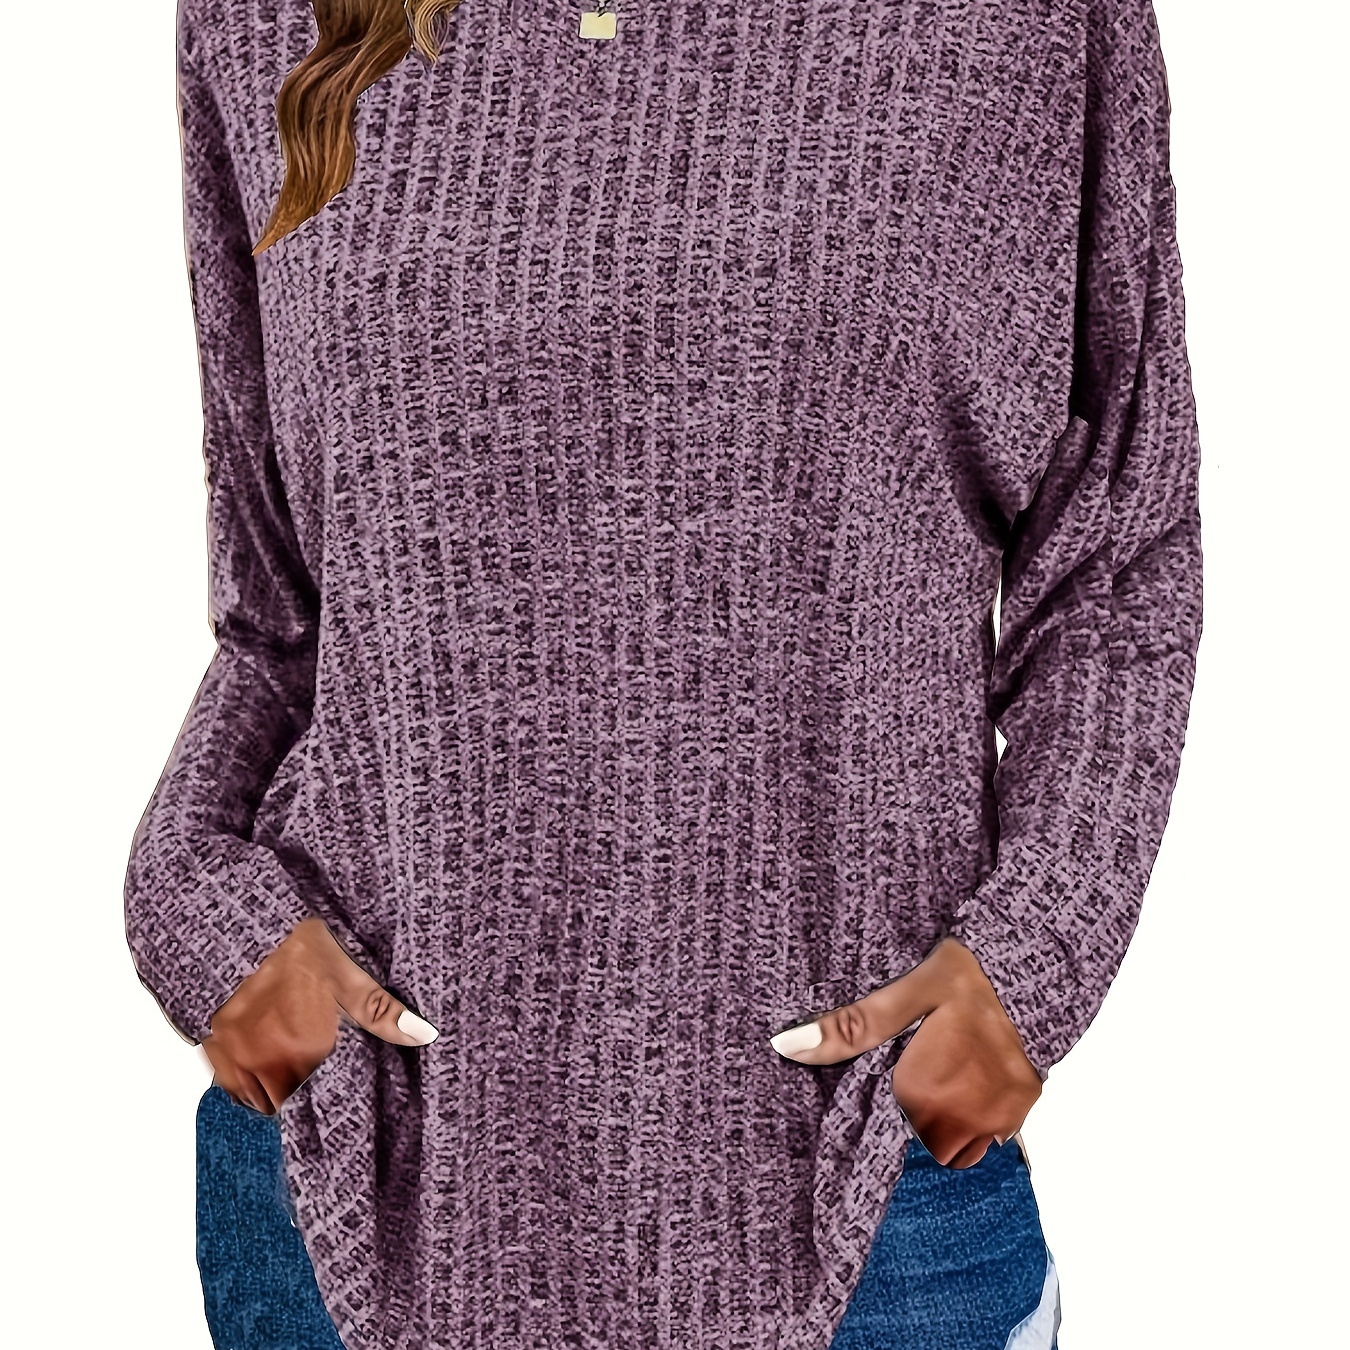 

Plus Size Casual Sweater, Women's Plus Solid Ribbed Long Sleeve Round Neck Knit Top